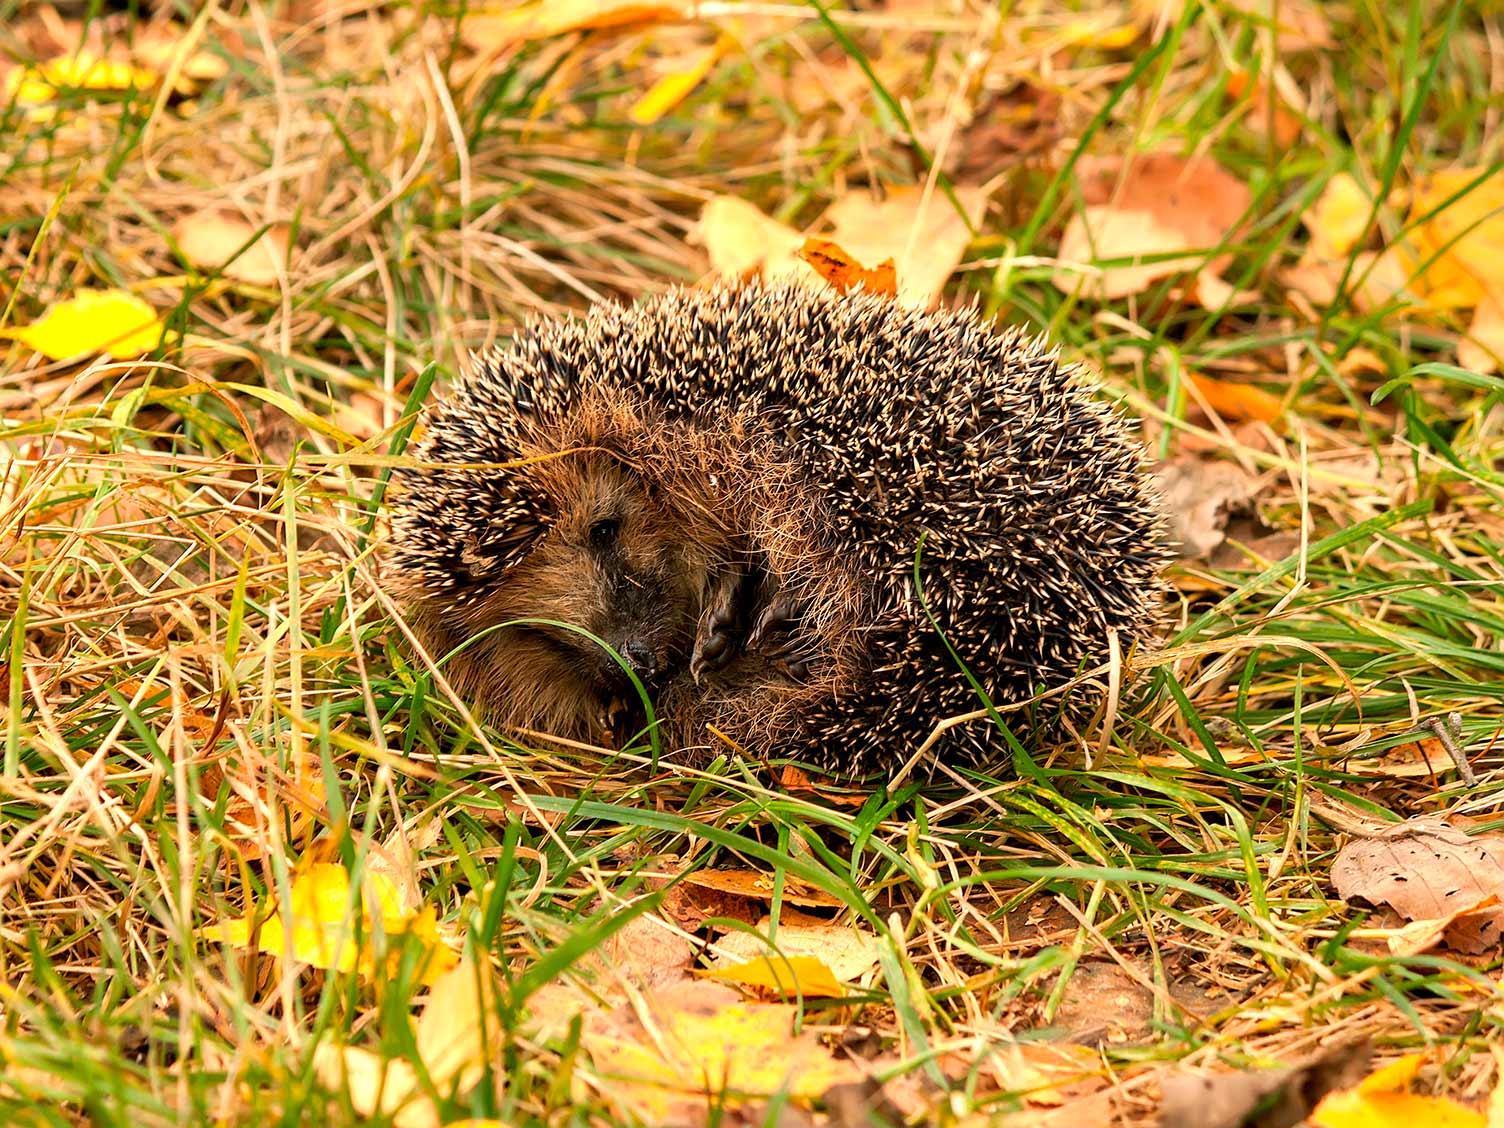 Hedgehog curled up in a ball for protection